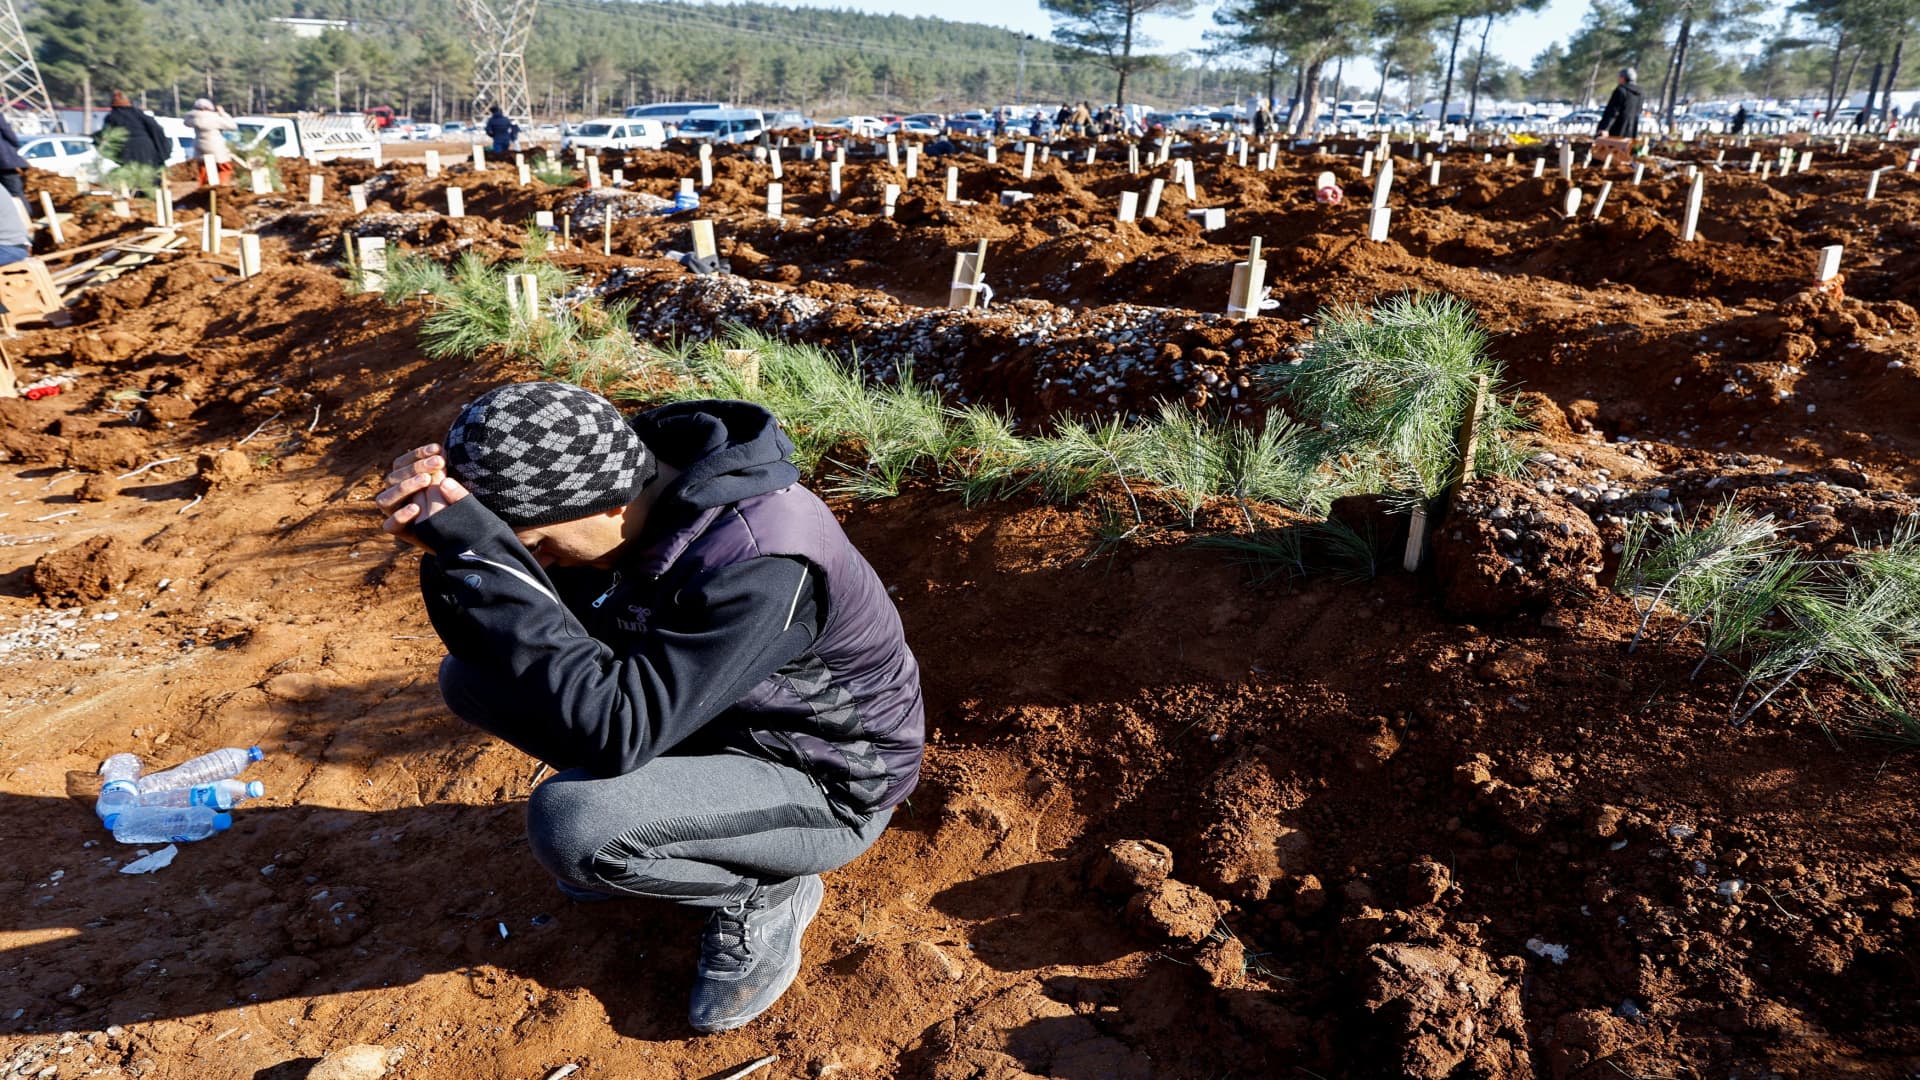 A man reacts next to the graves of victims of the deadly earthquake, in a cemetery in Kahramanmaras, Turkey February 9, 2023.